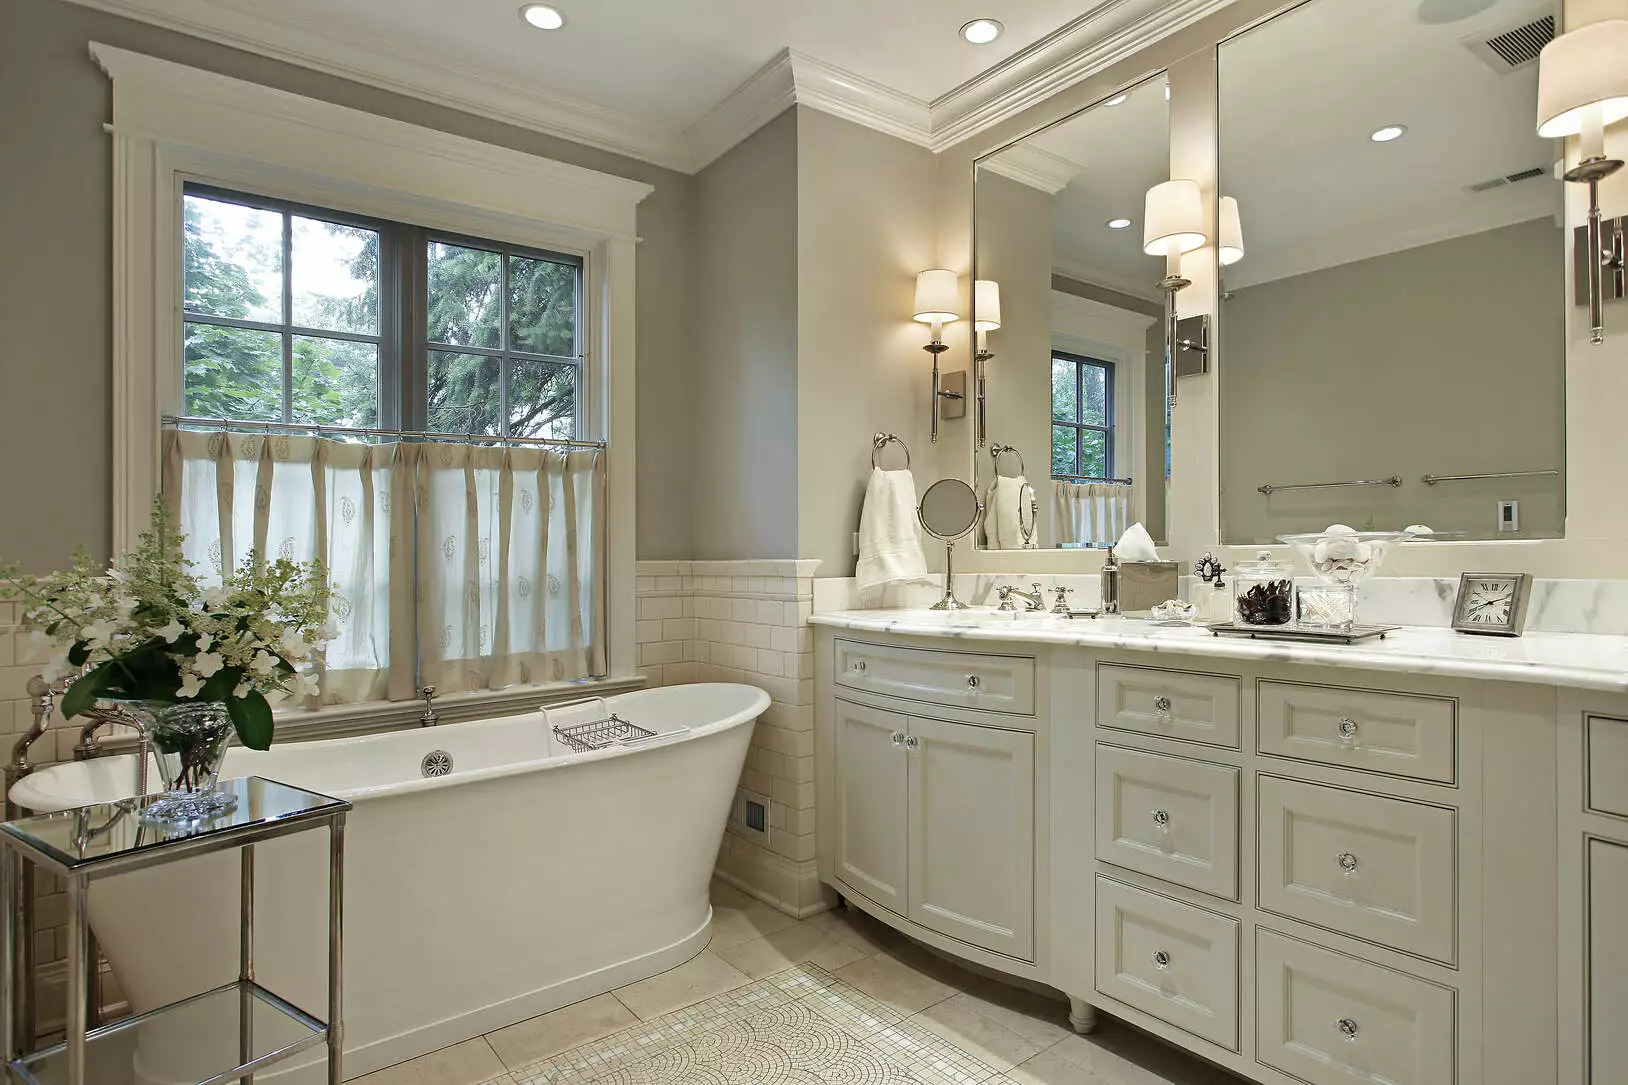 Bathroom renovation and design services in Fayetteville NC